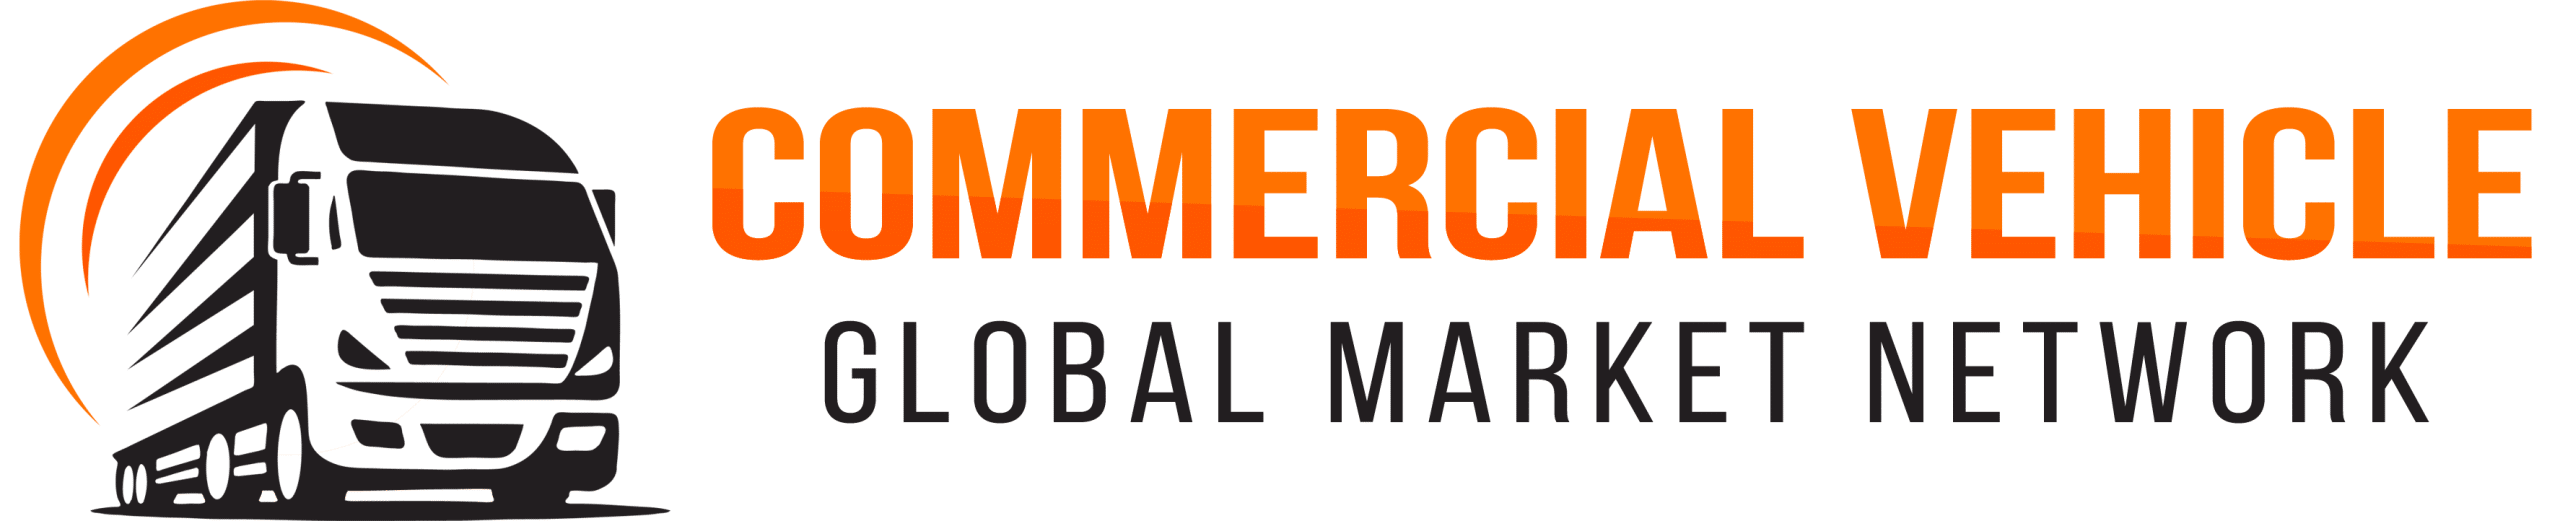 Commercial Vehicle | Global Network